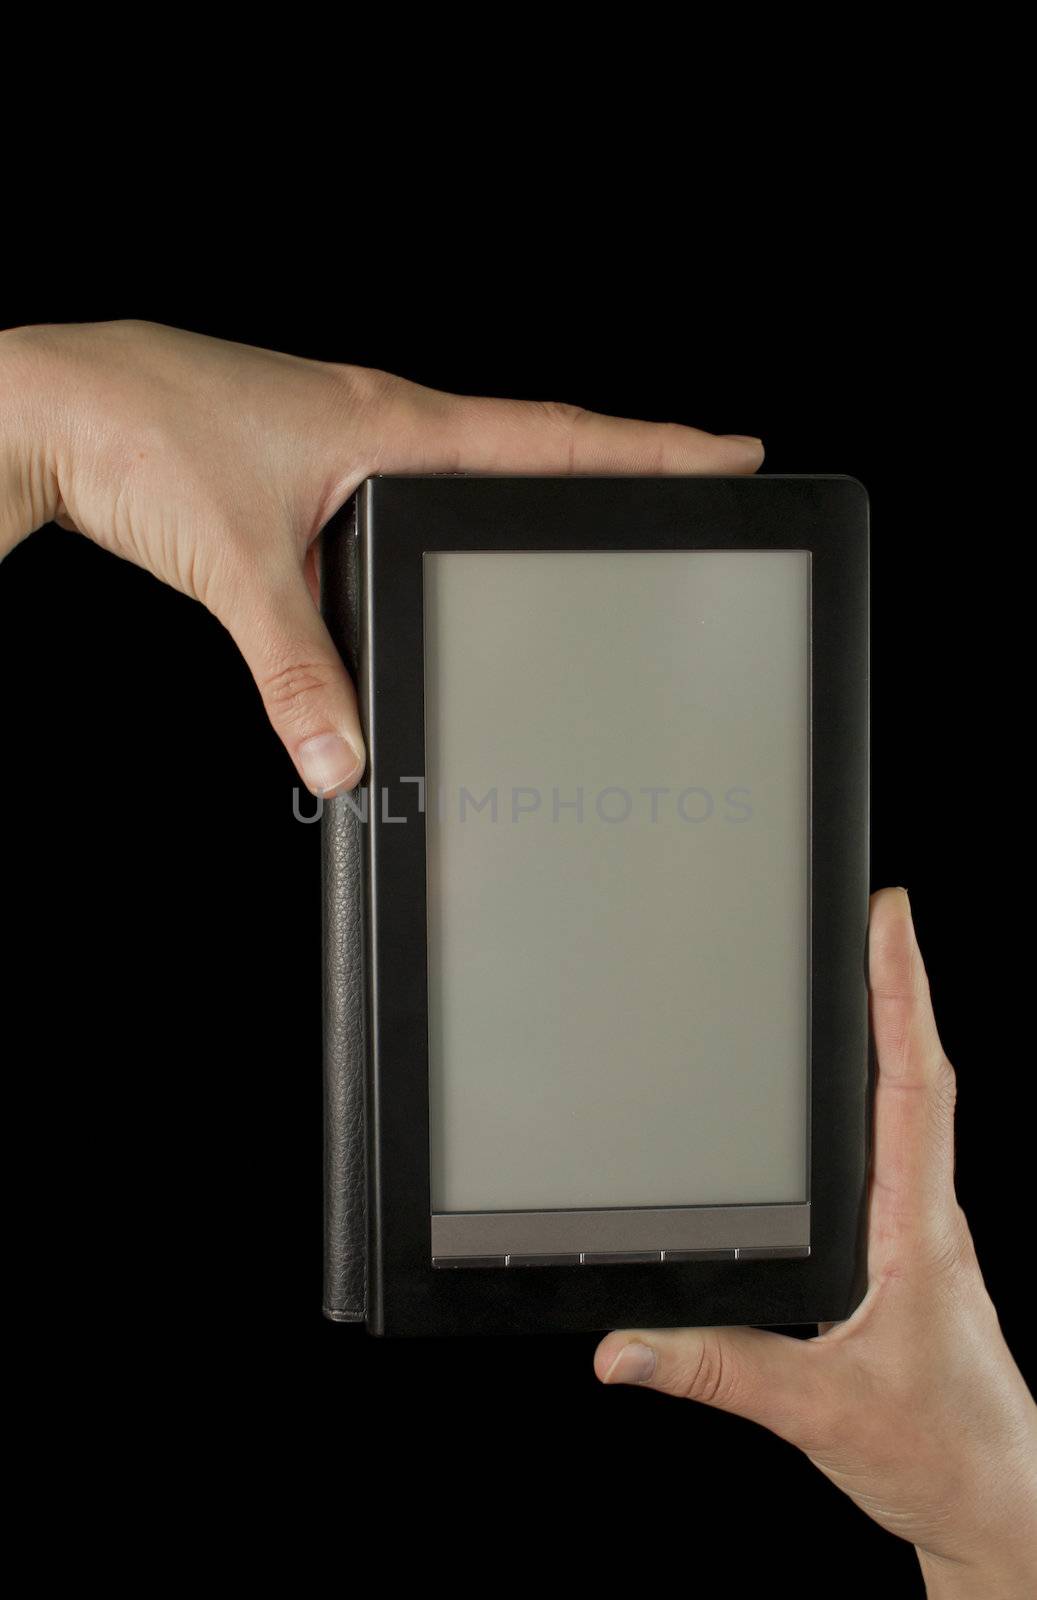 Hands holding an electronic book reader on the black background